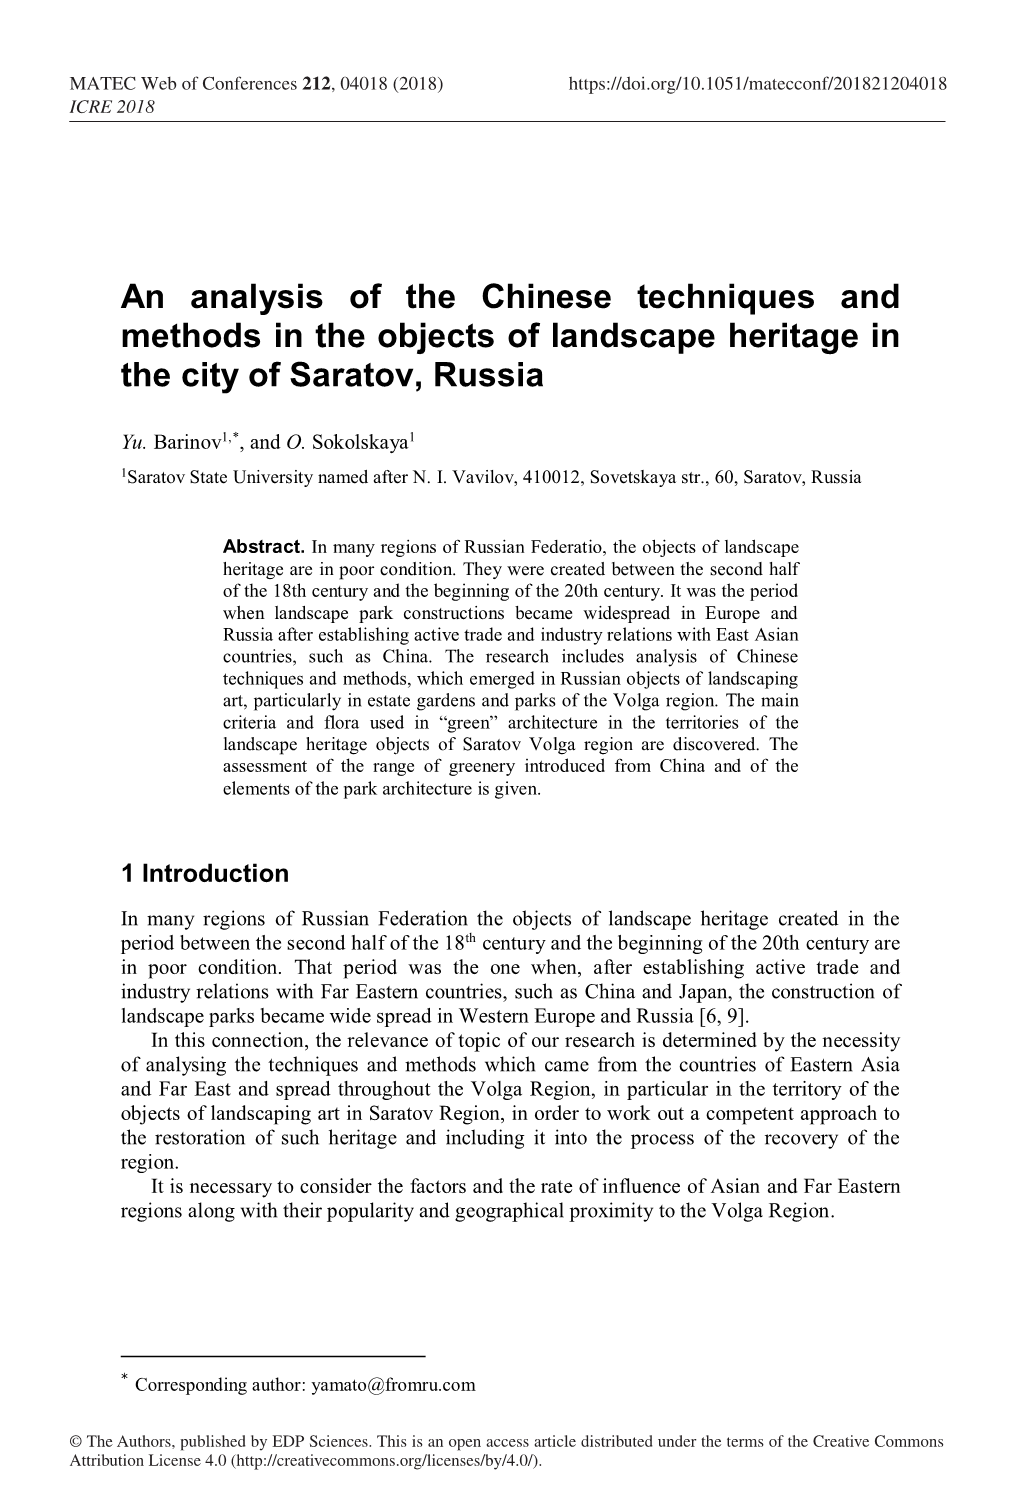 An Analysis of the Chinese Techniques and Methods in the Objects of Landscape Heritage in the City of Saratov, Russia